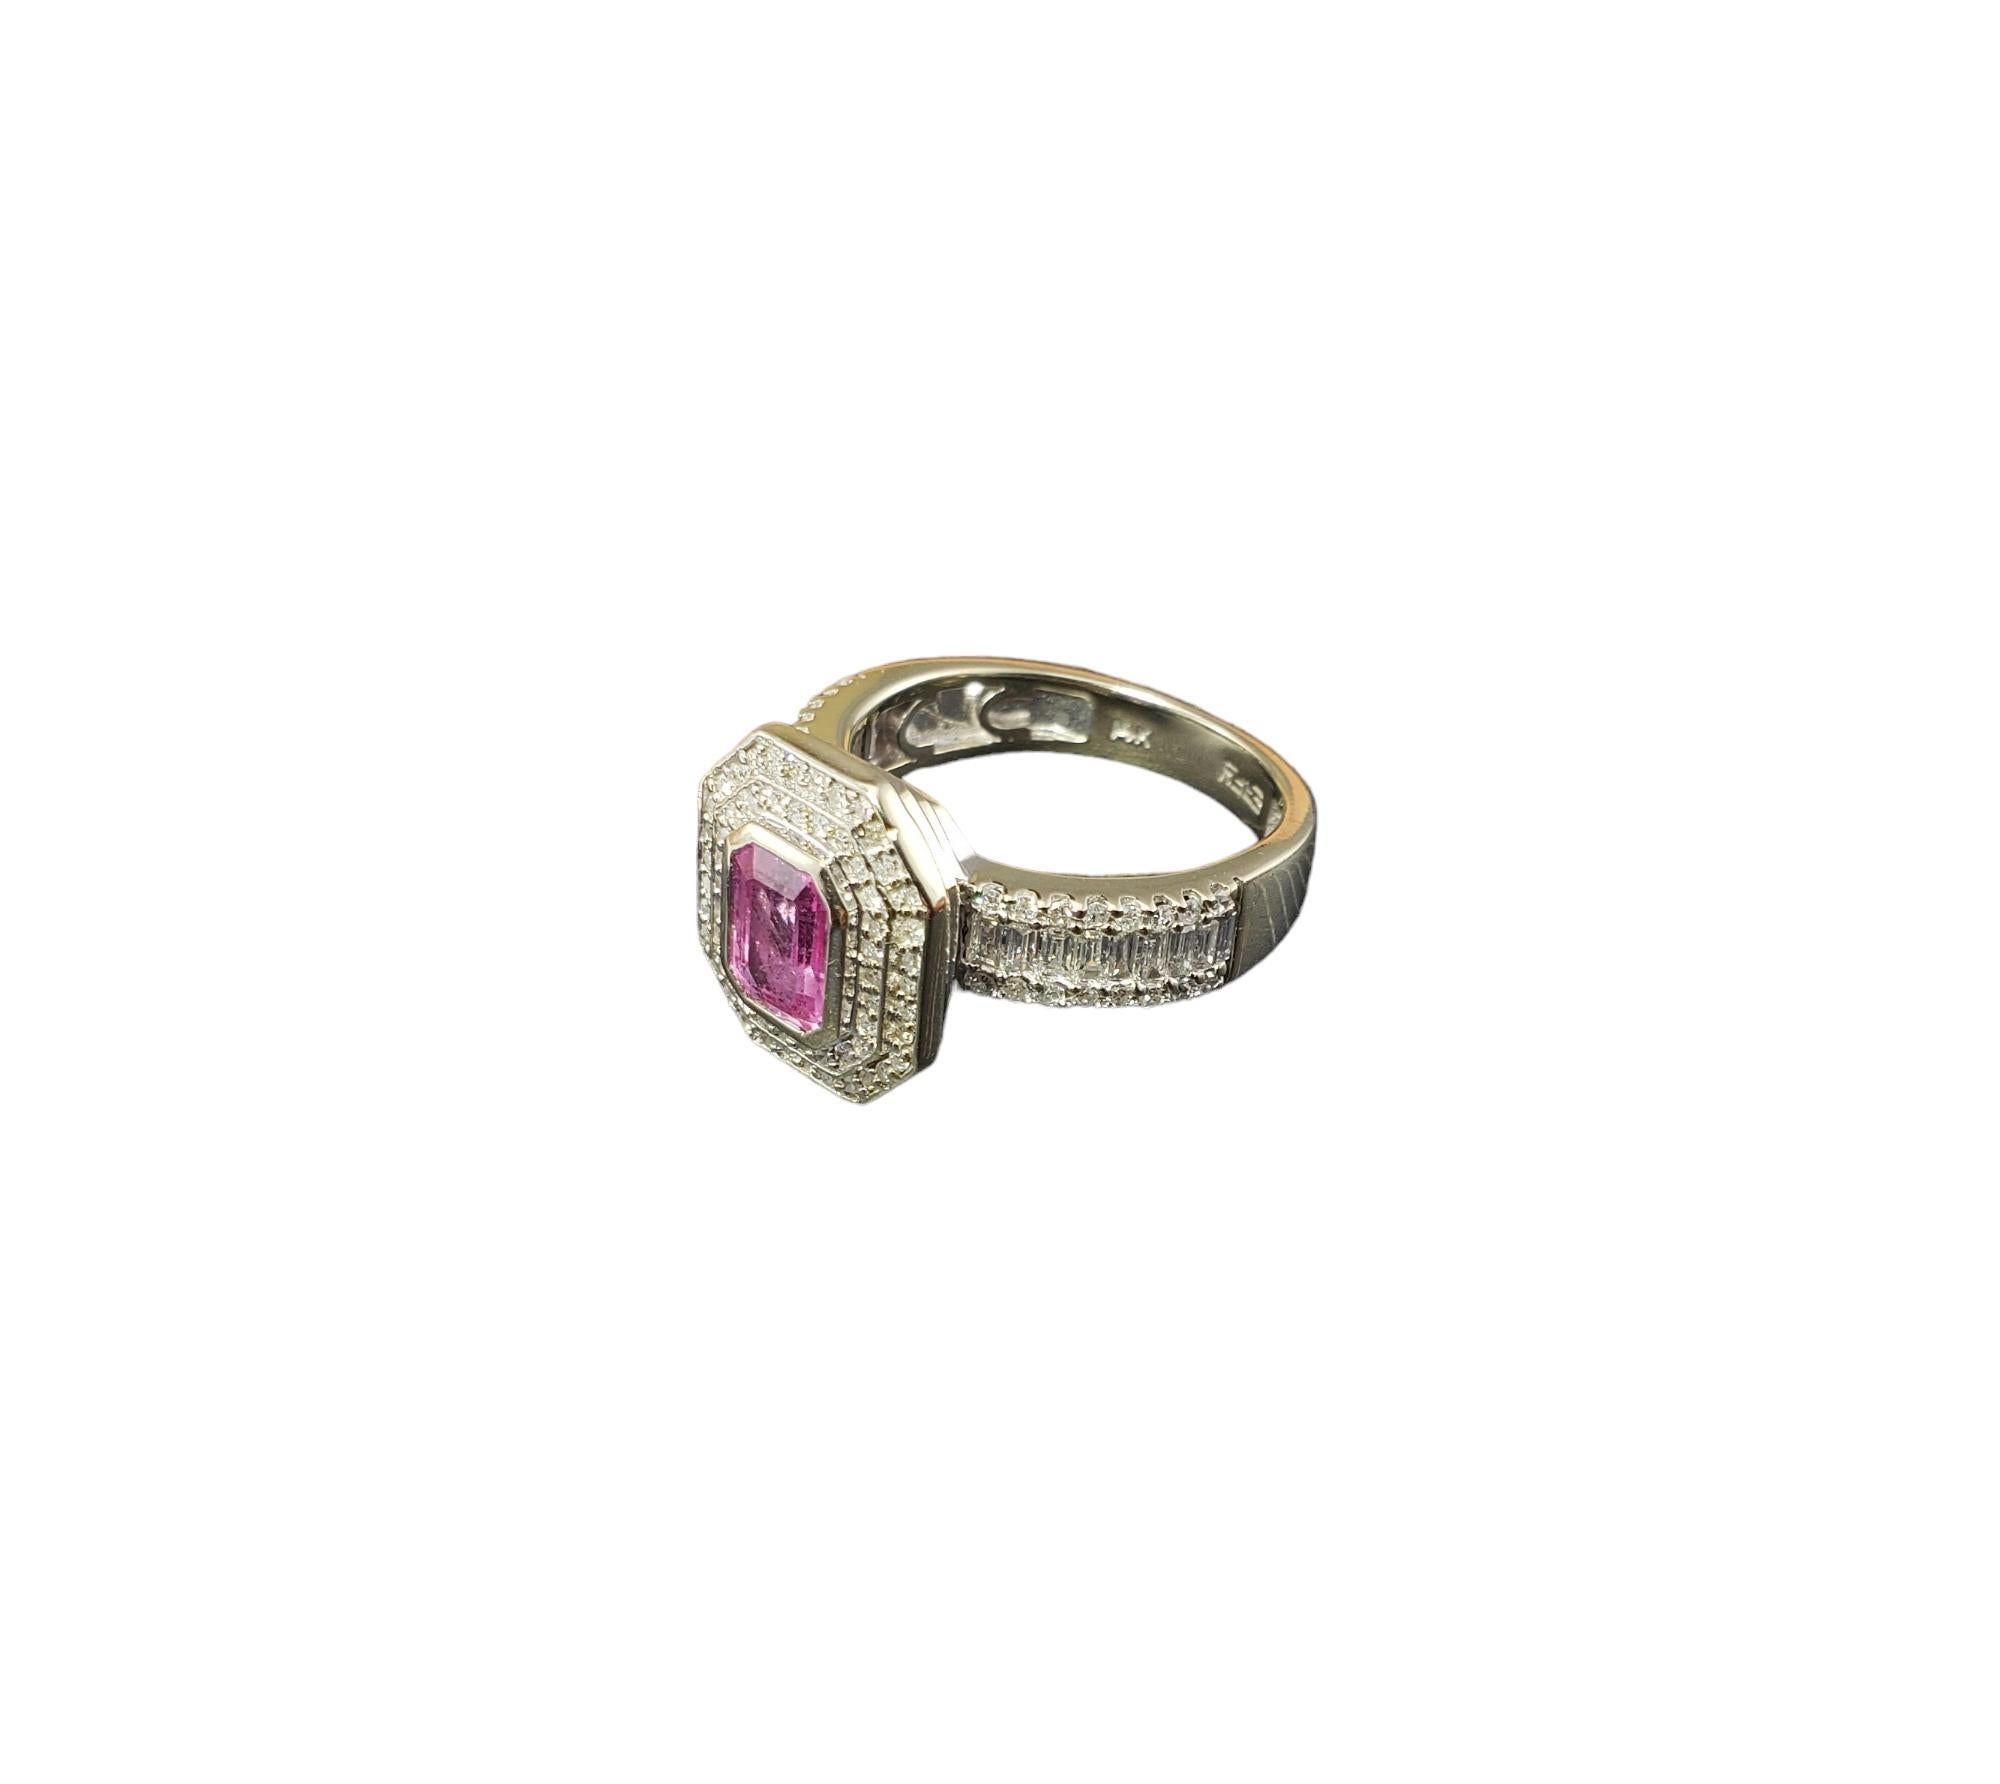 Emerald Cut Effy 14K Gold Pink Sapphire & Diamond Ring Size 7 #16673 For Sale